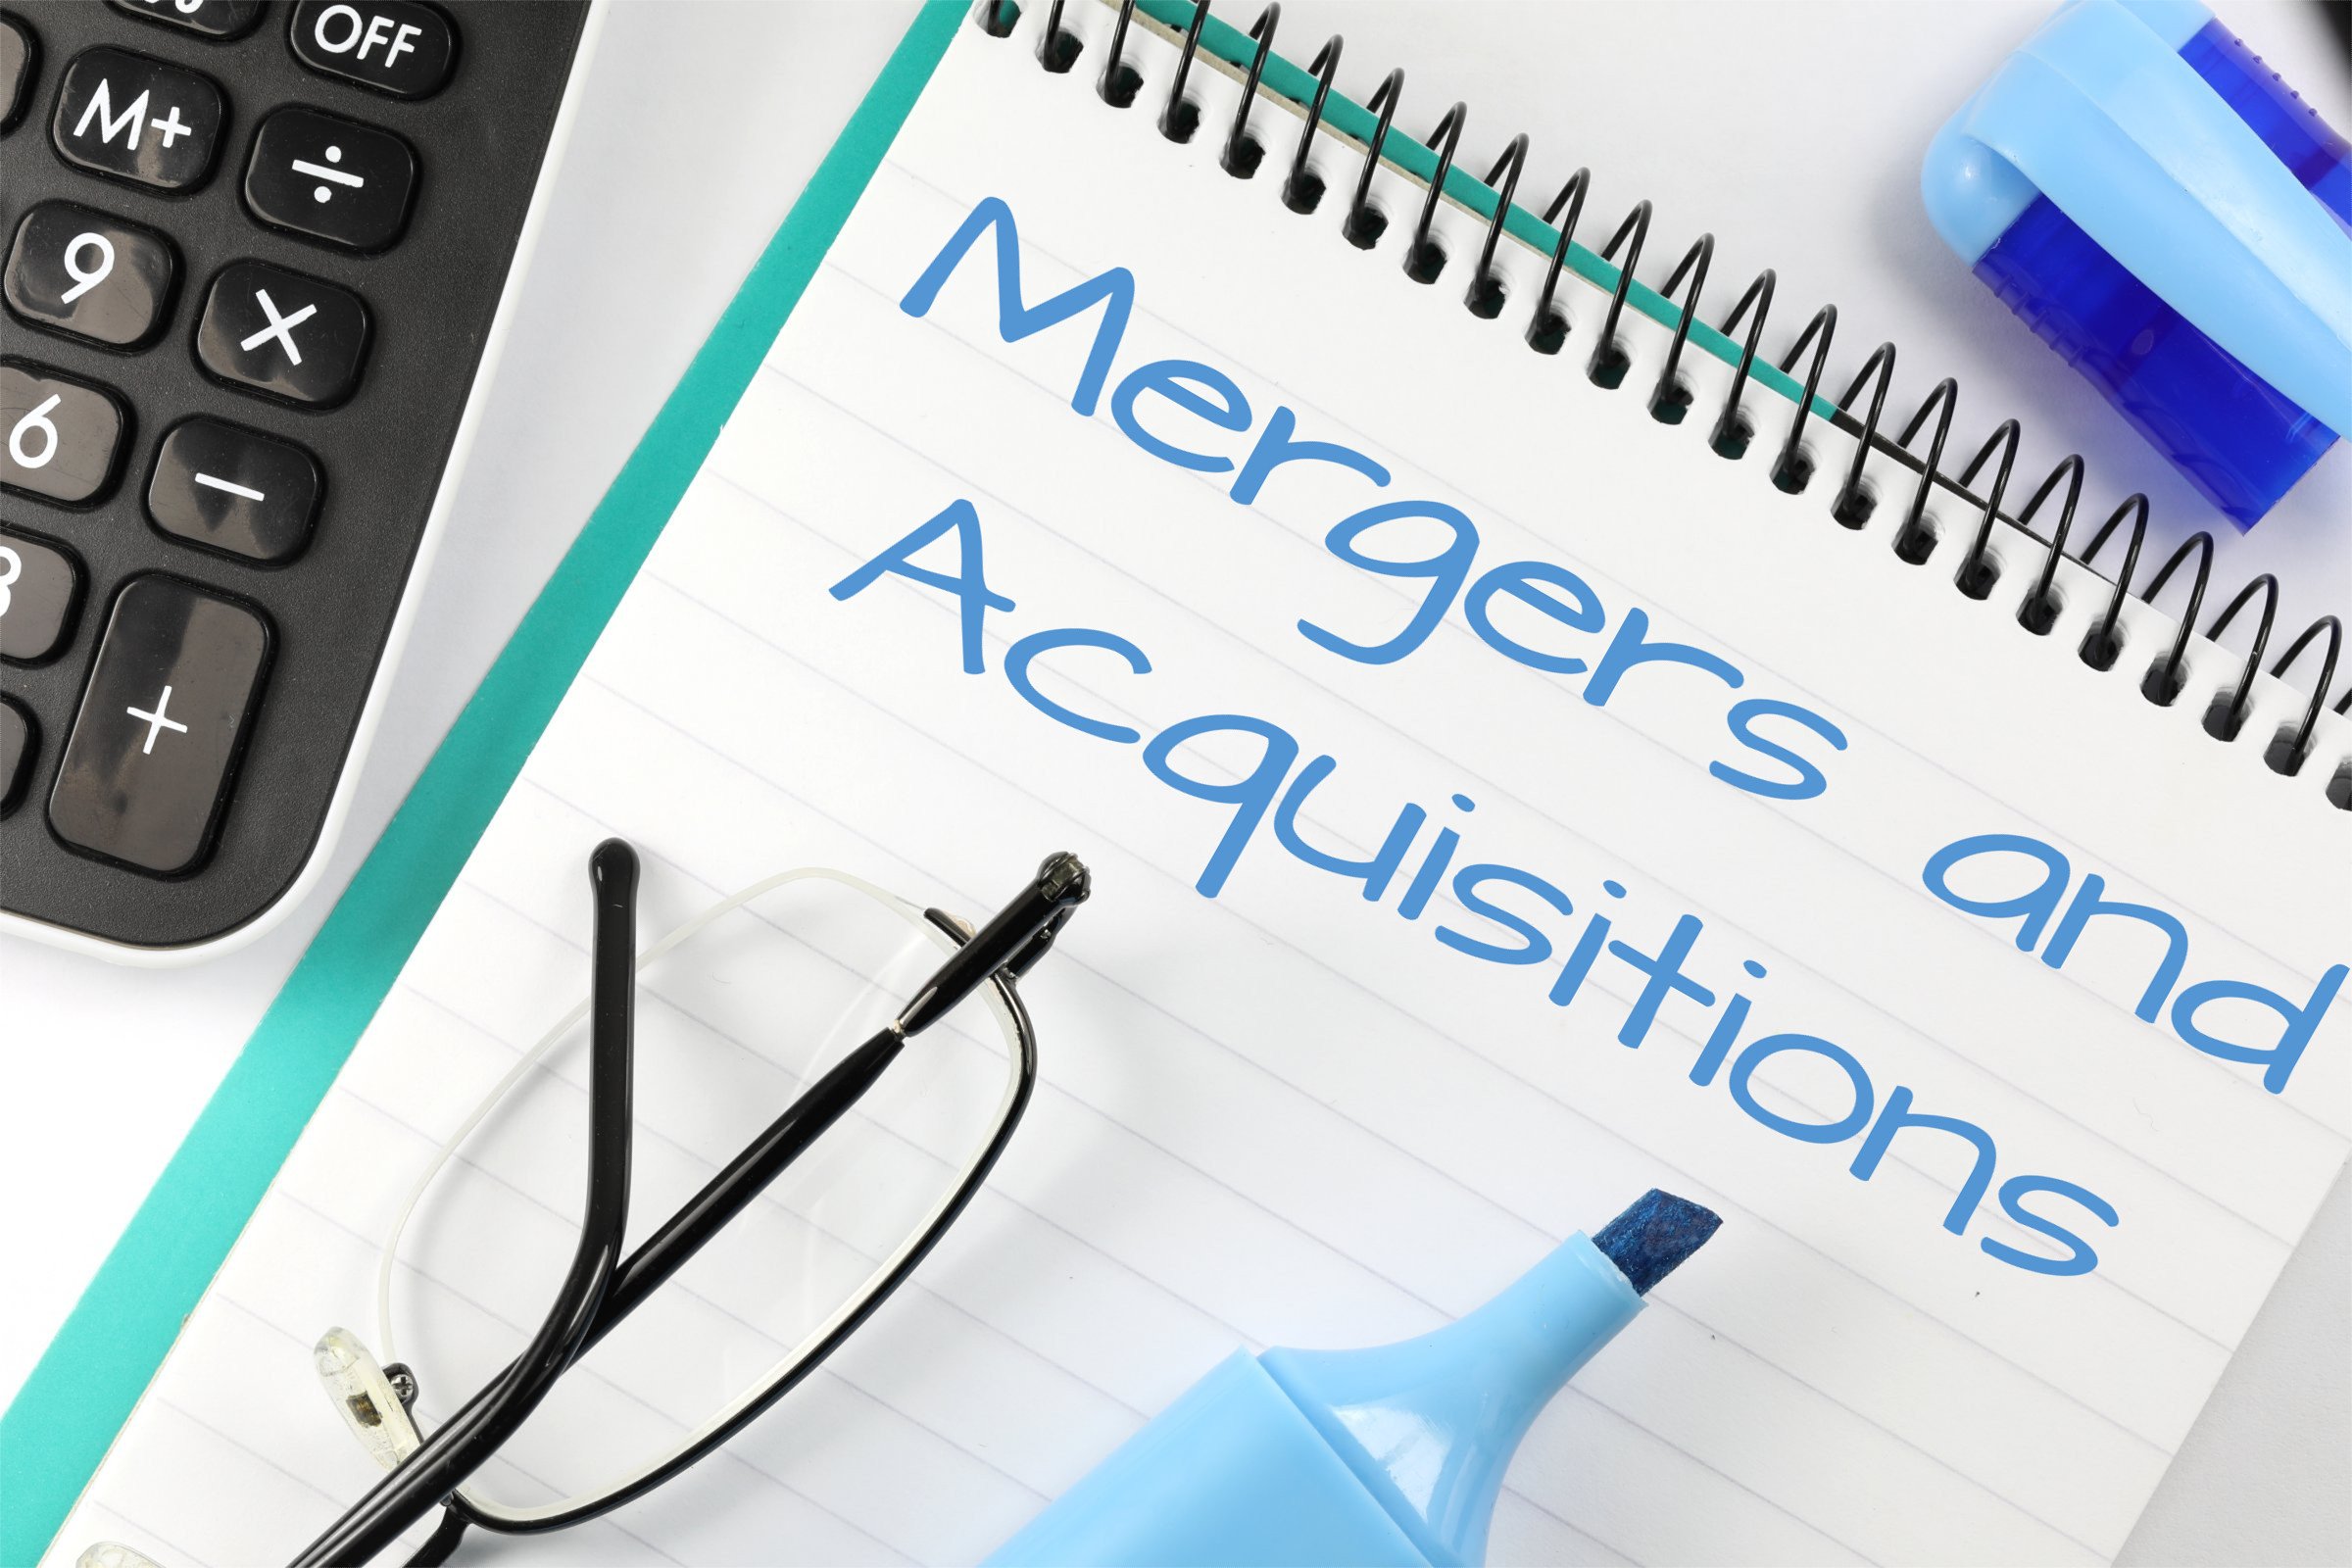 mergers and acquisitions